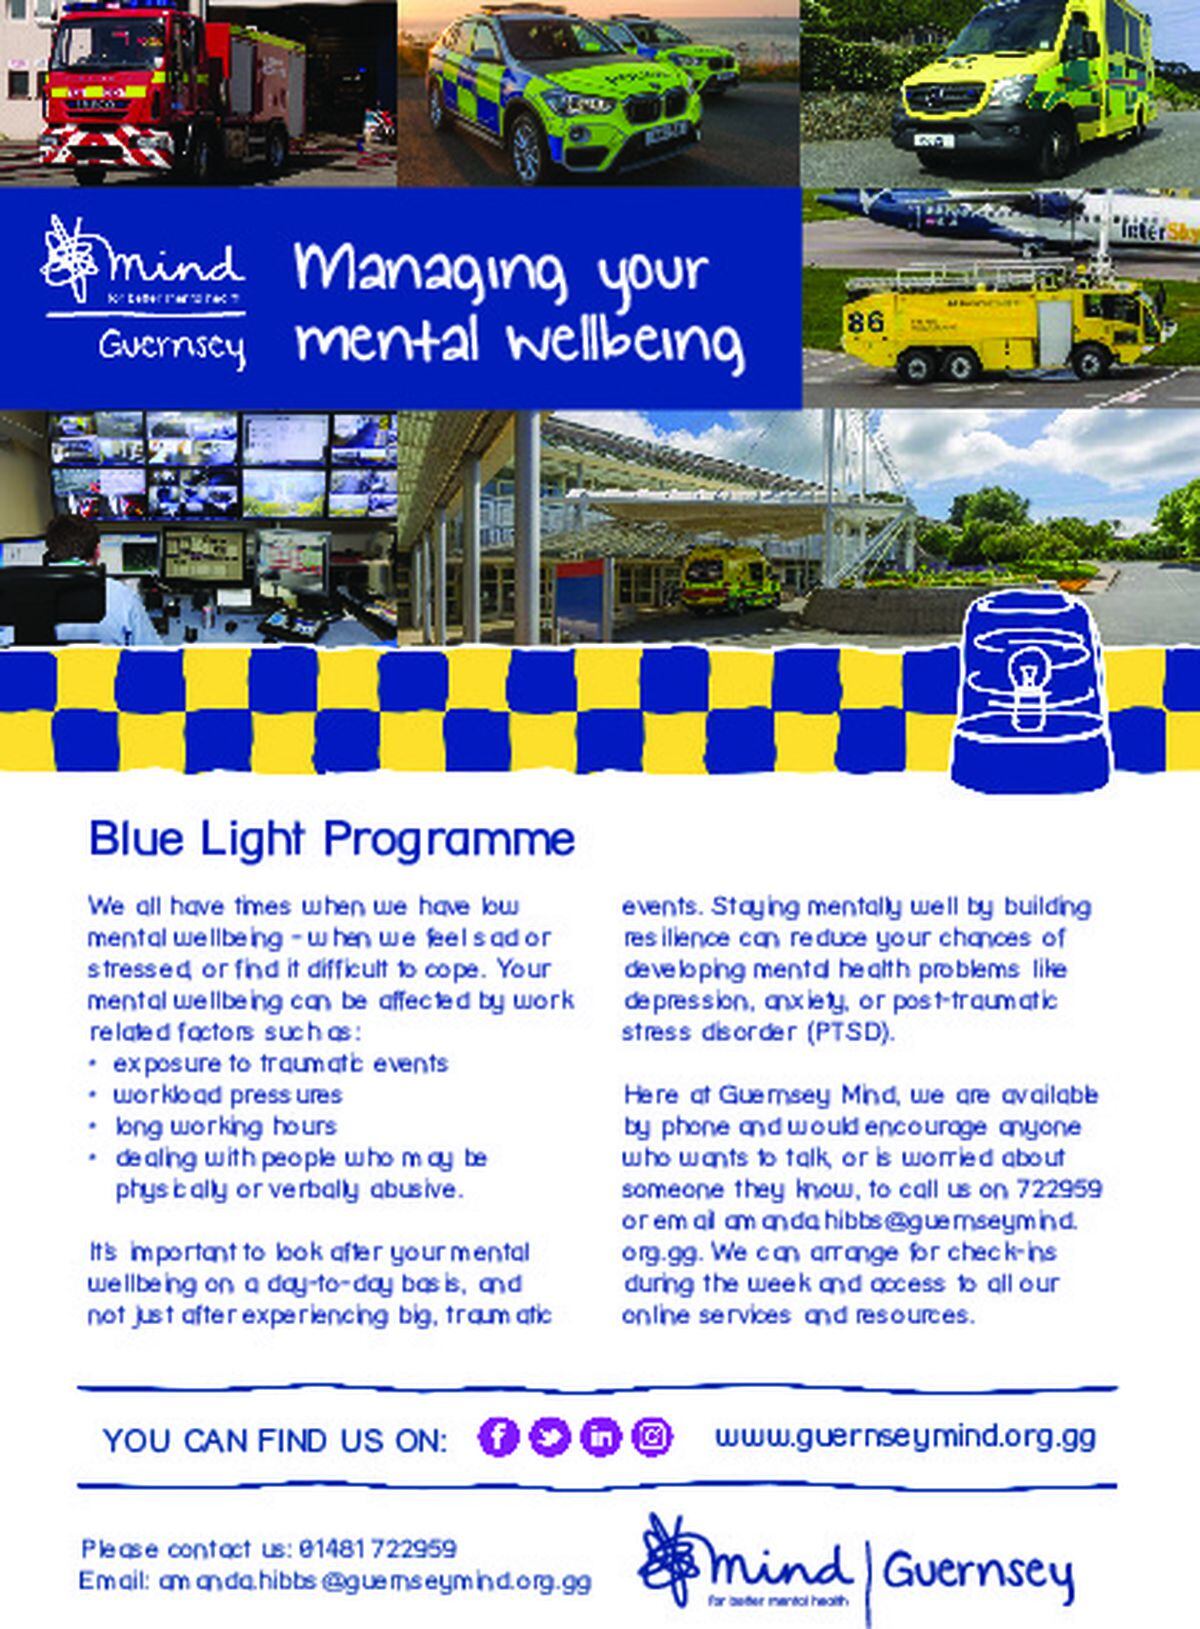 The Blue Light programme aims to work closely with the emergency services to provide support, particularly to those who may have experienced trauma in the past whether currently serving or retired.